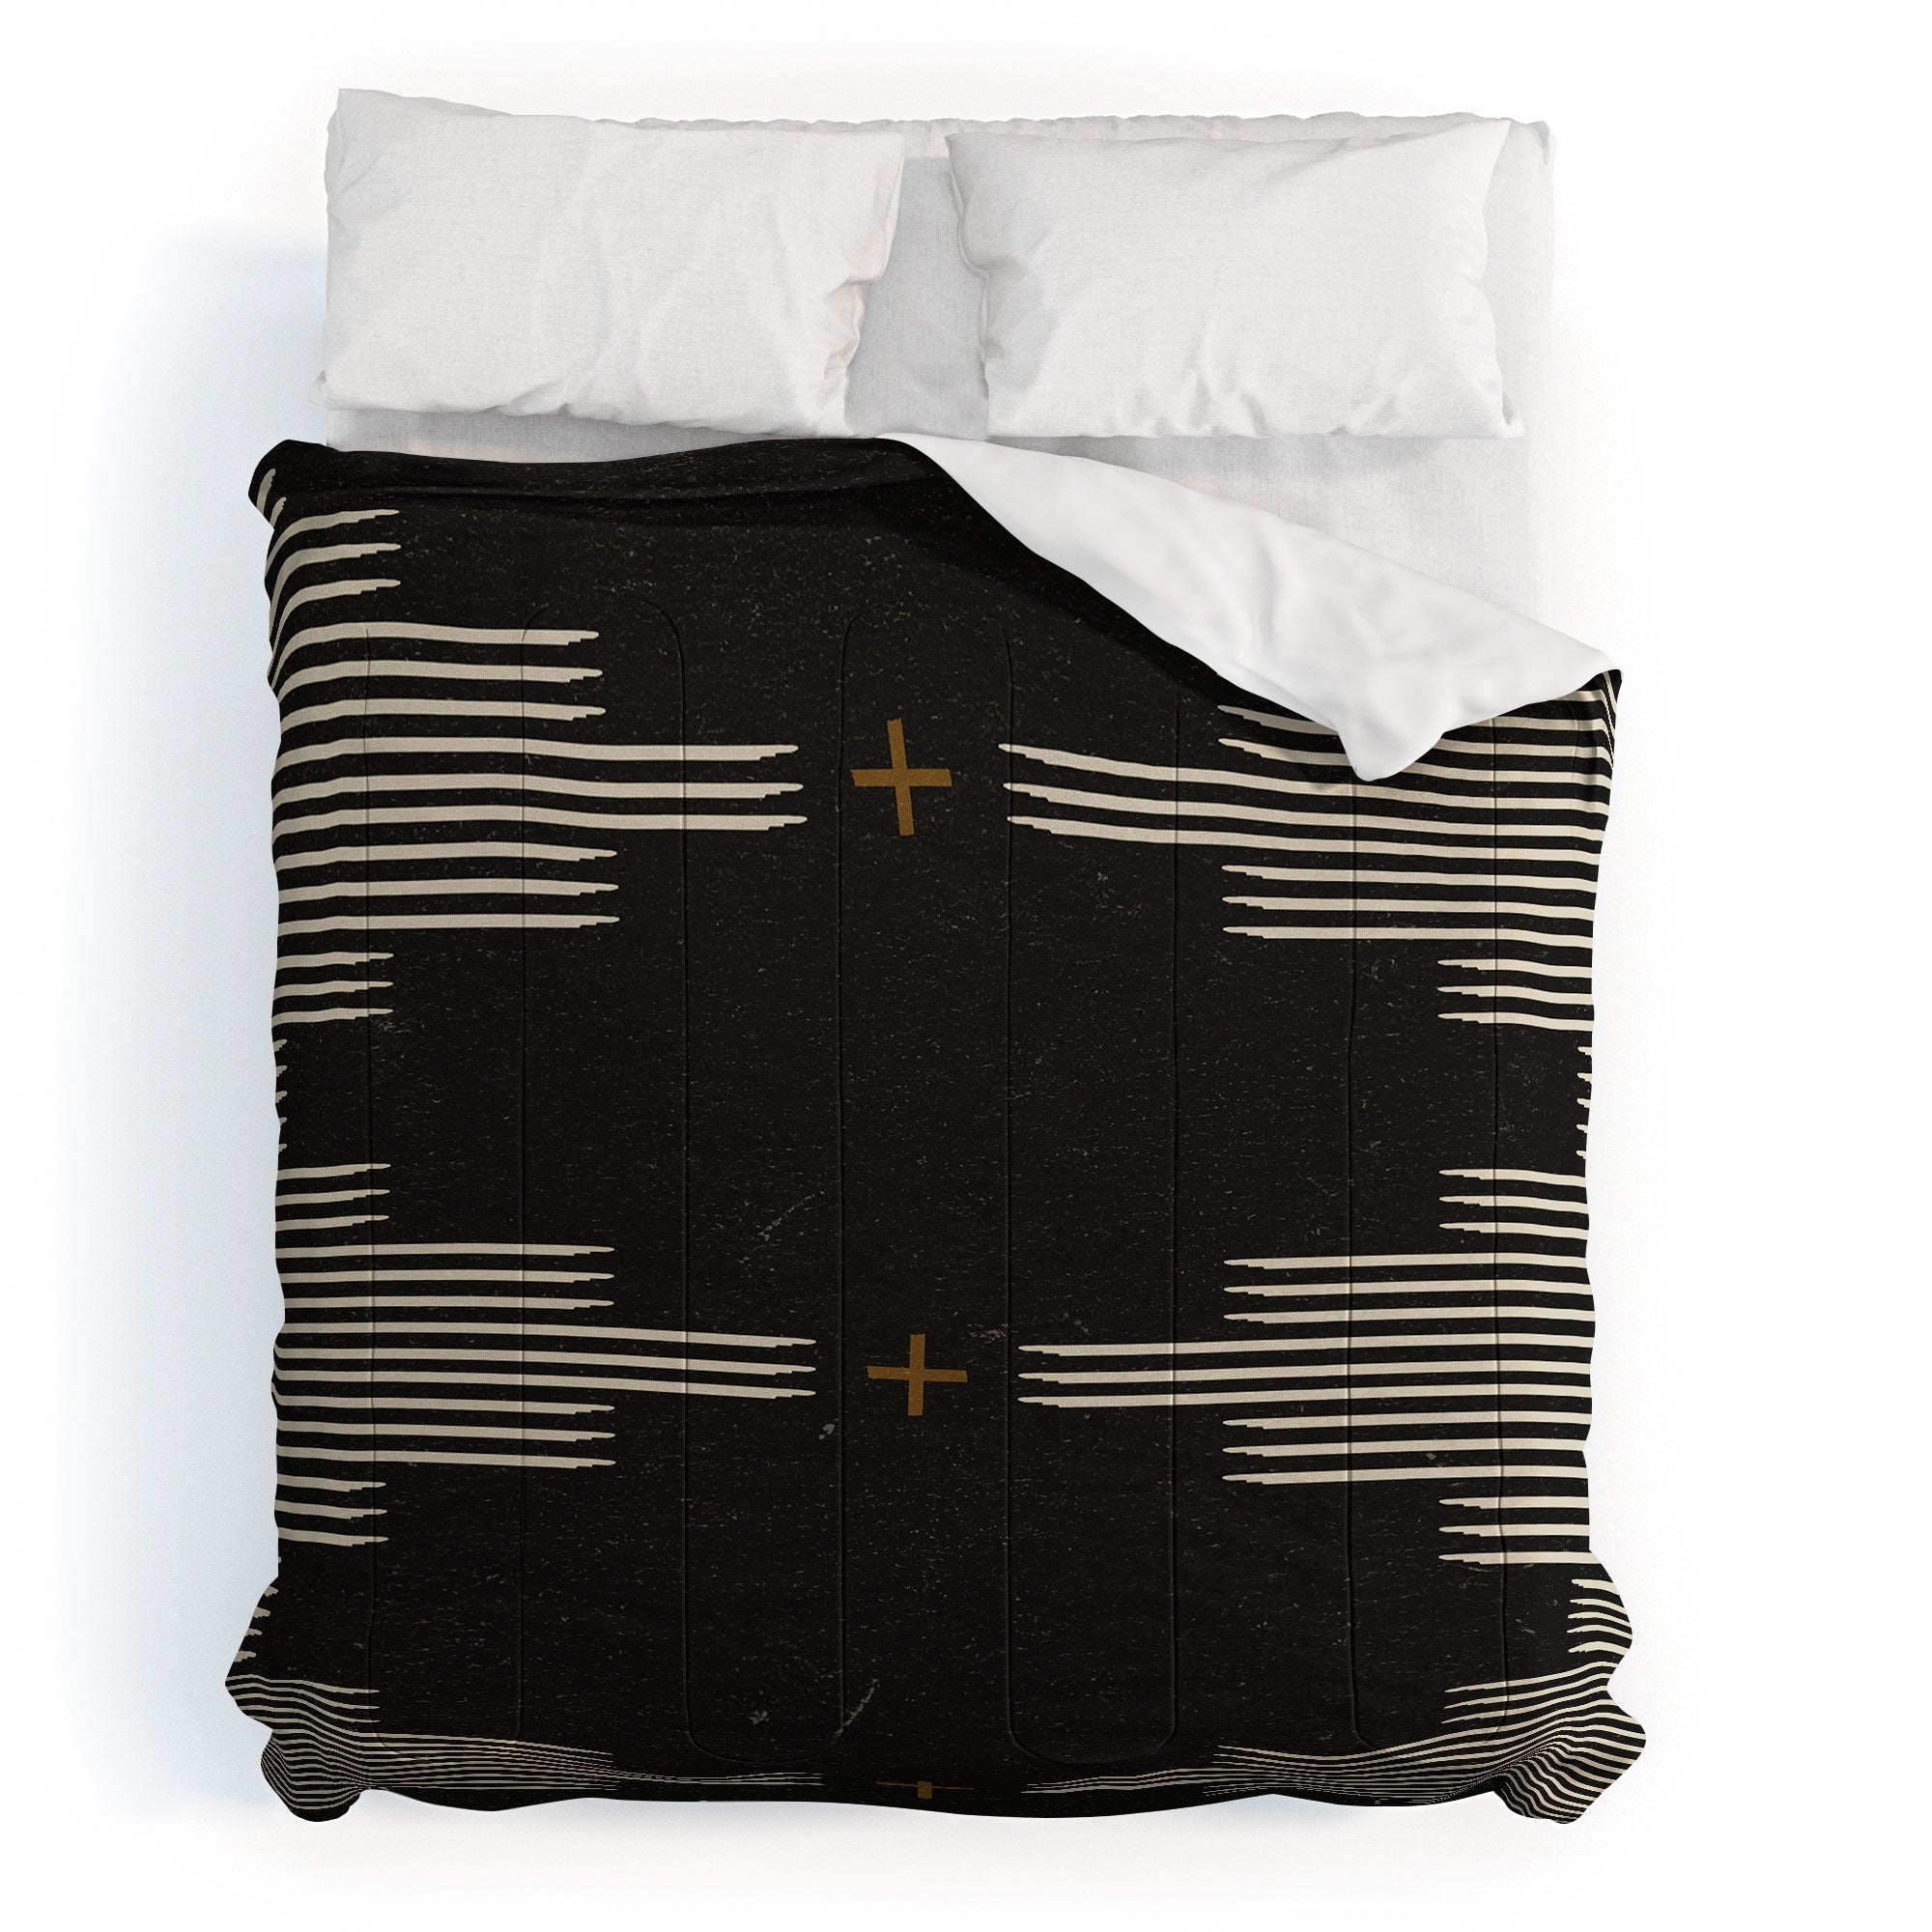 Southern Minimalist Comforter &/or Bed in a Bag Set (DS) DD